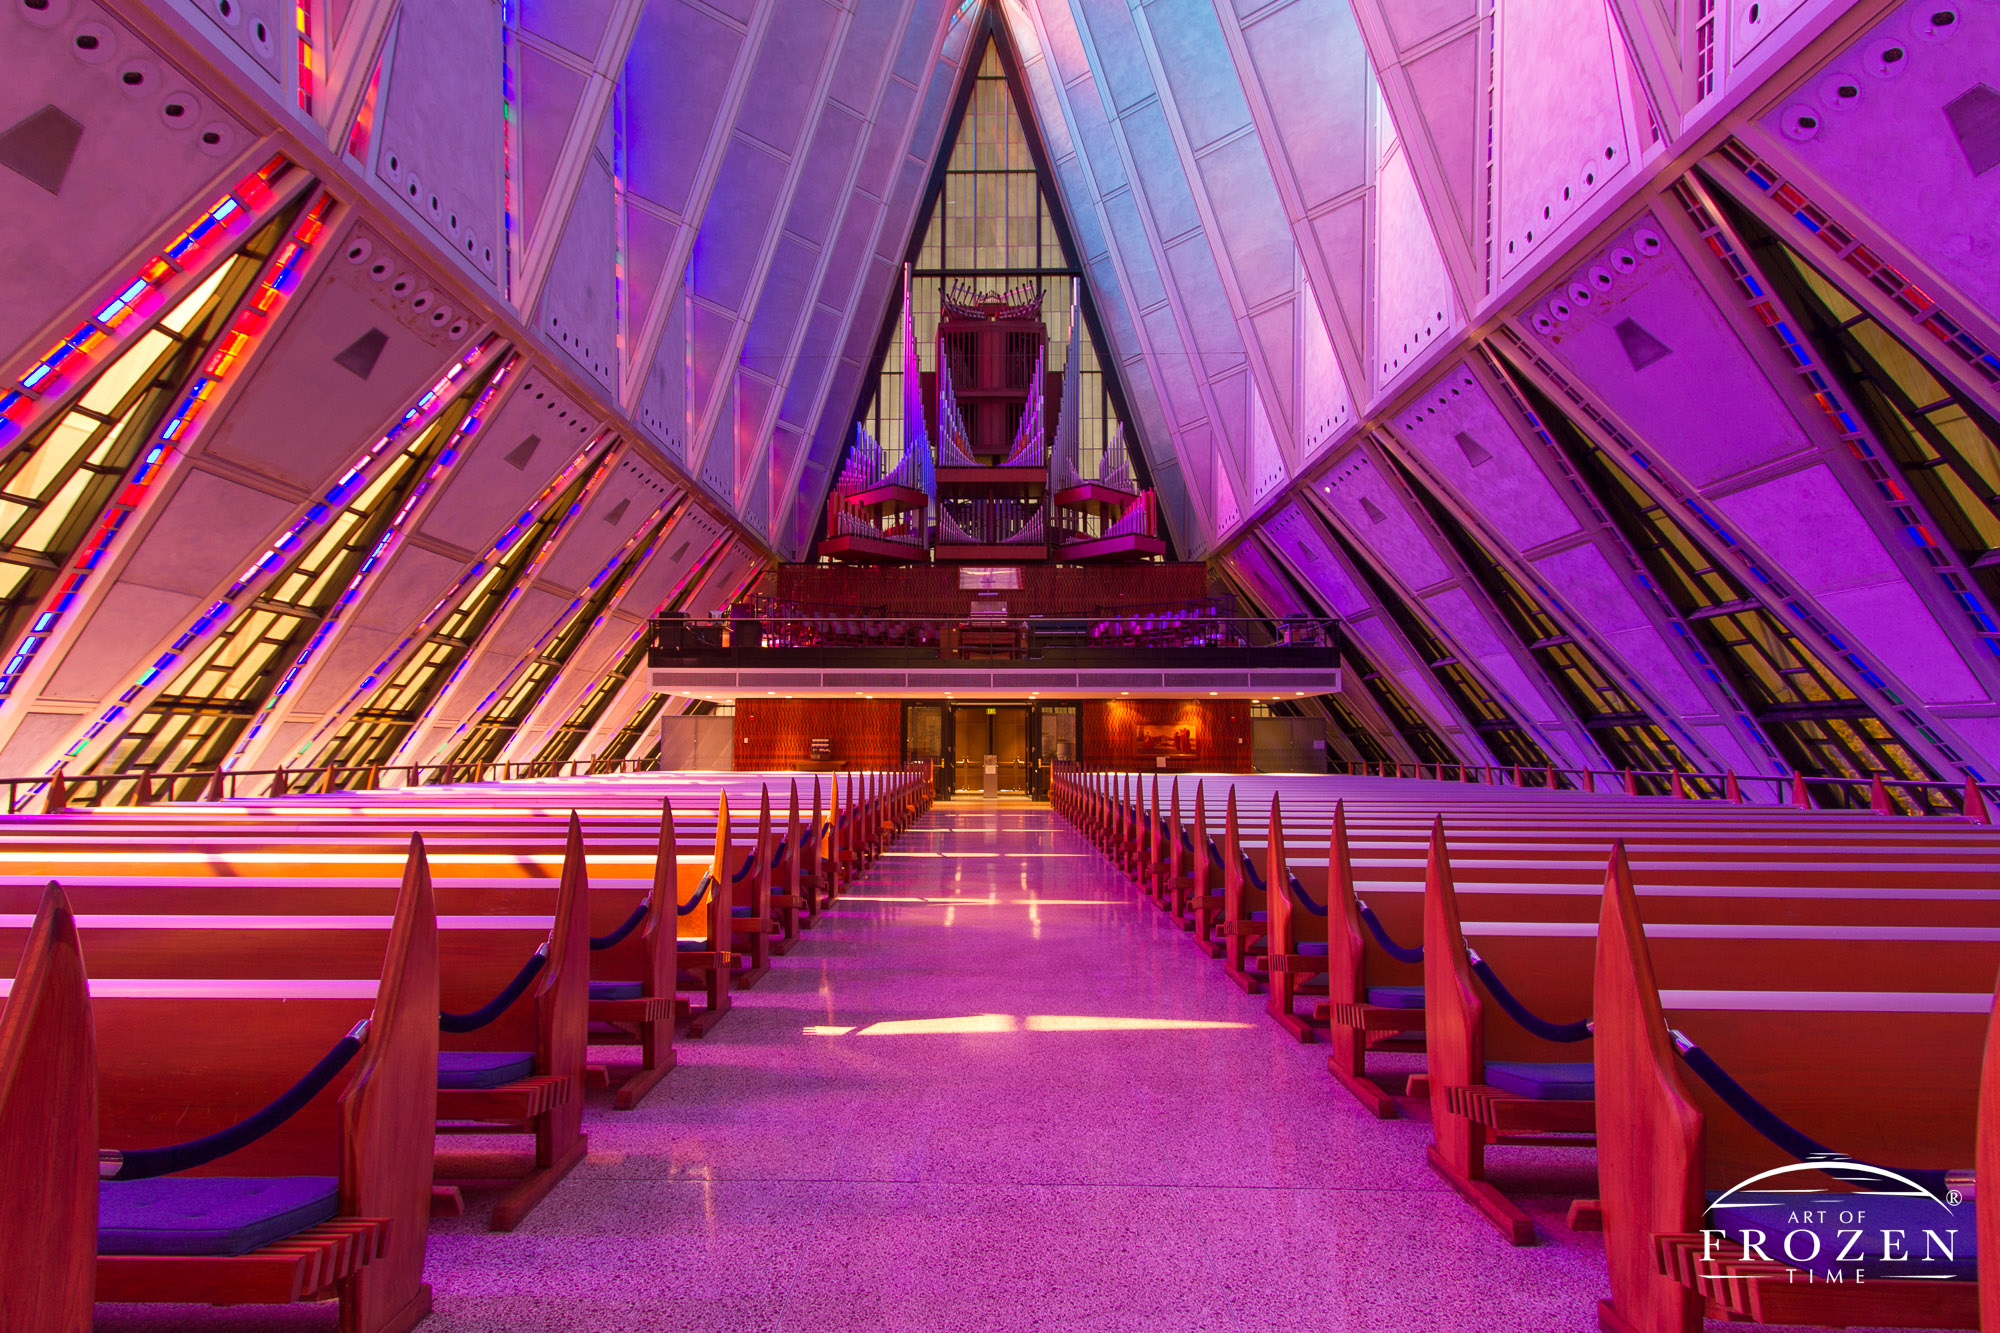 As sunrise occurs over the Air Force Academy Cadet Chapel, its pink and lavender stain glass windows fill the interior with unique hues